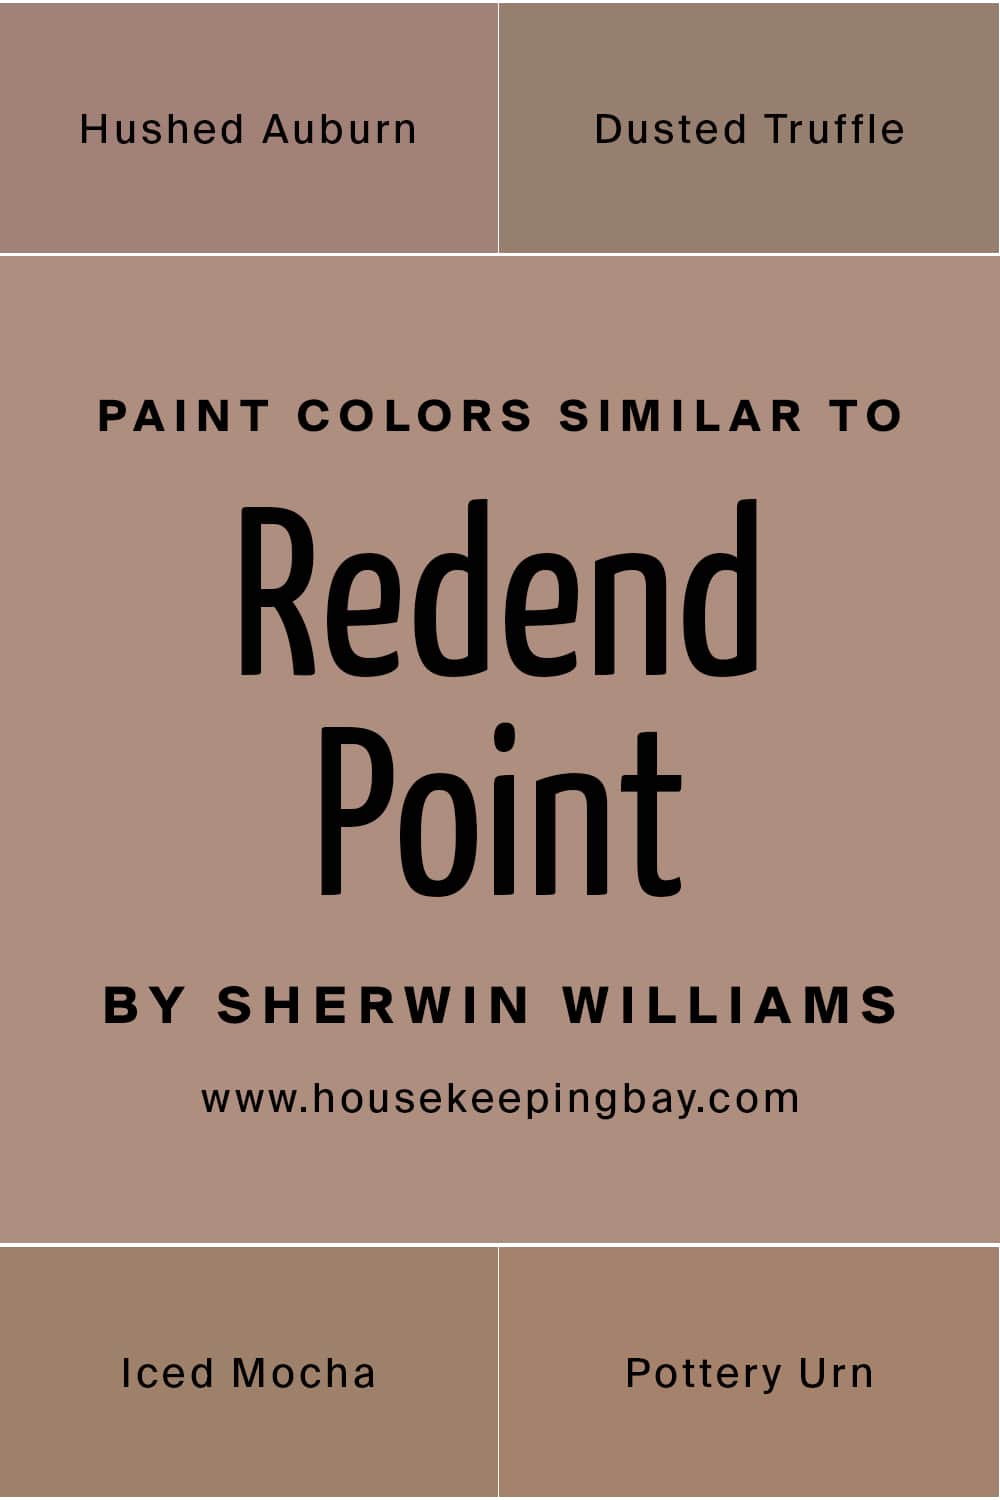 Paint Colors Similar to Redend Point by Sherwin Williams